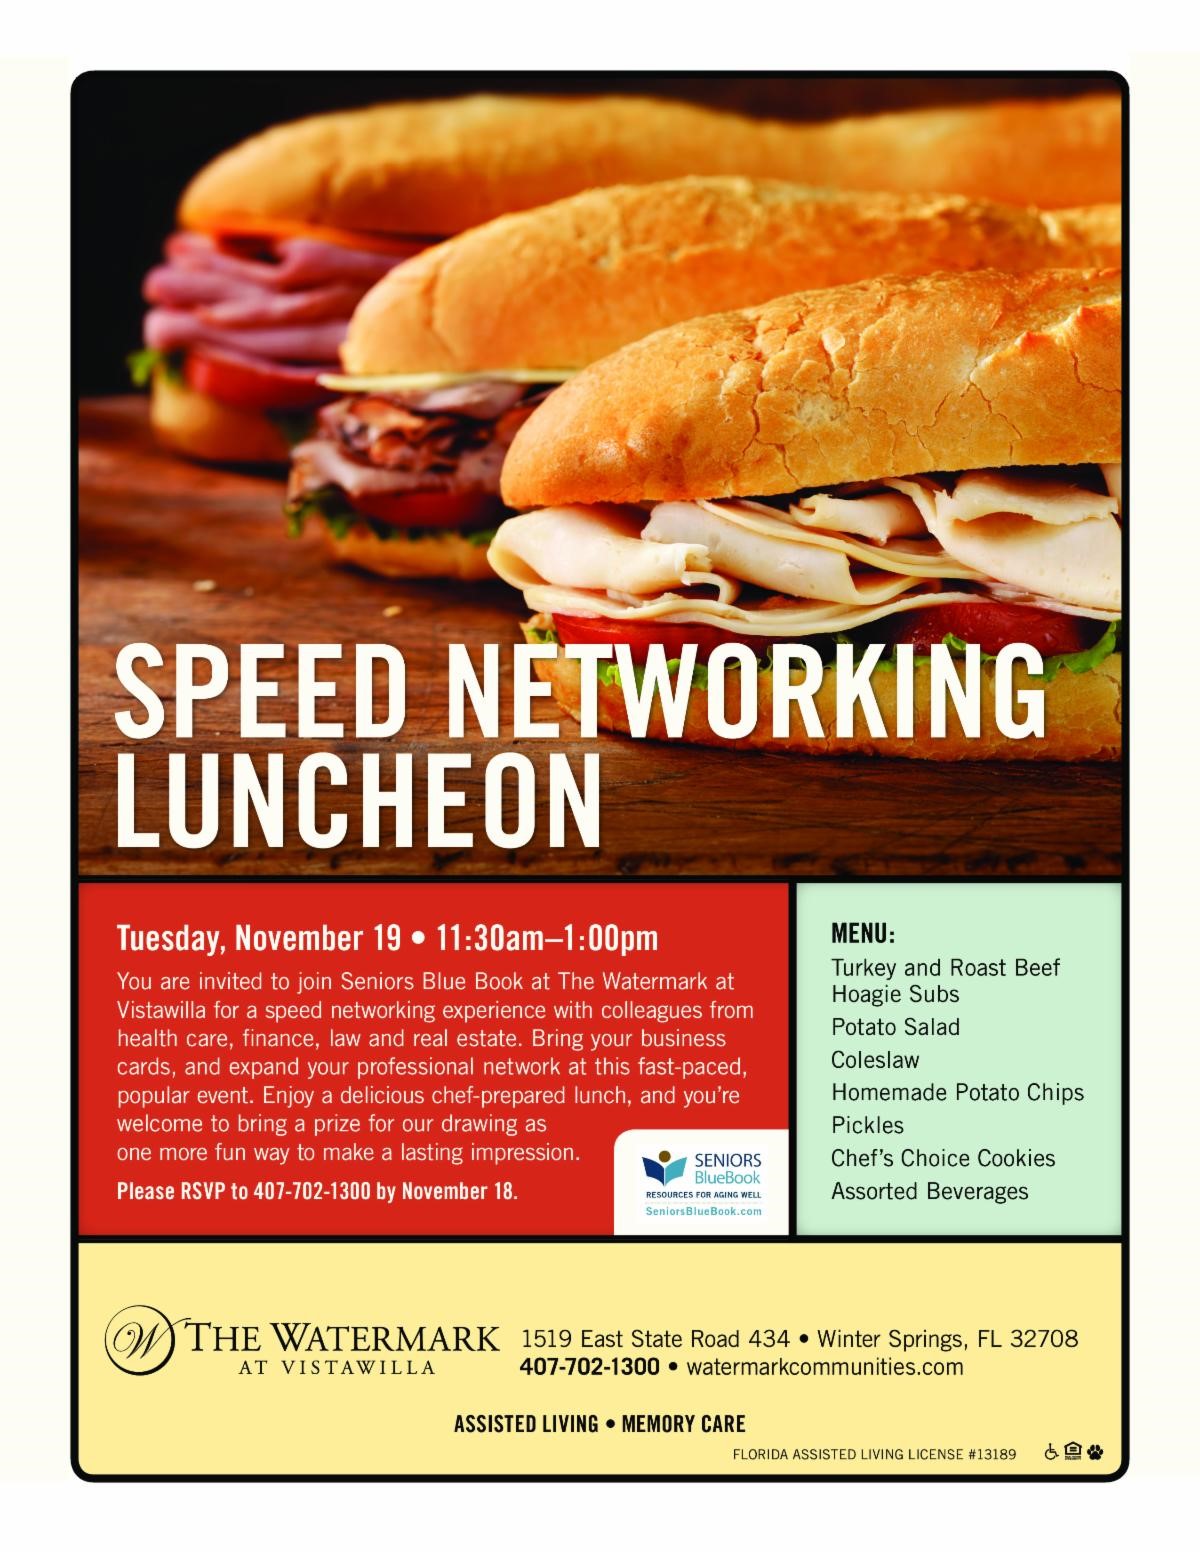 Seniors Blue Book Speed Networking Luncheon at The Watermark